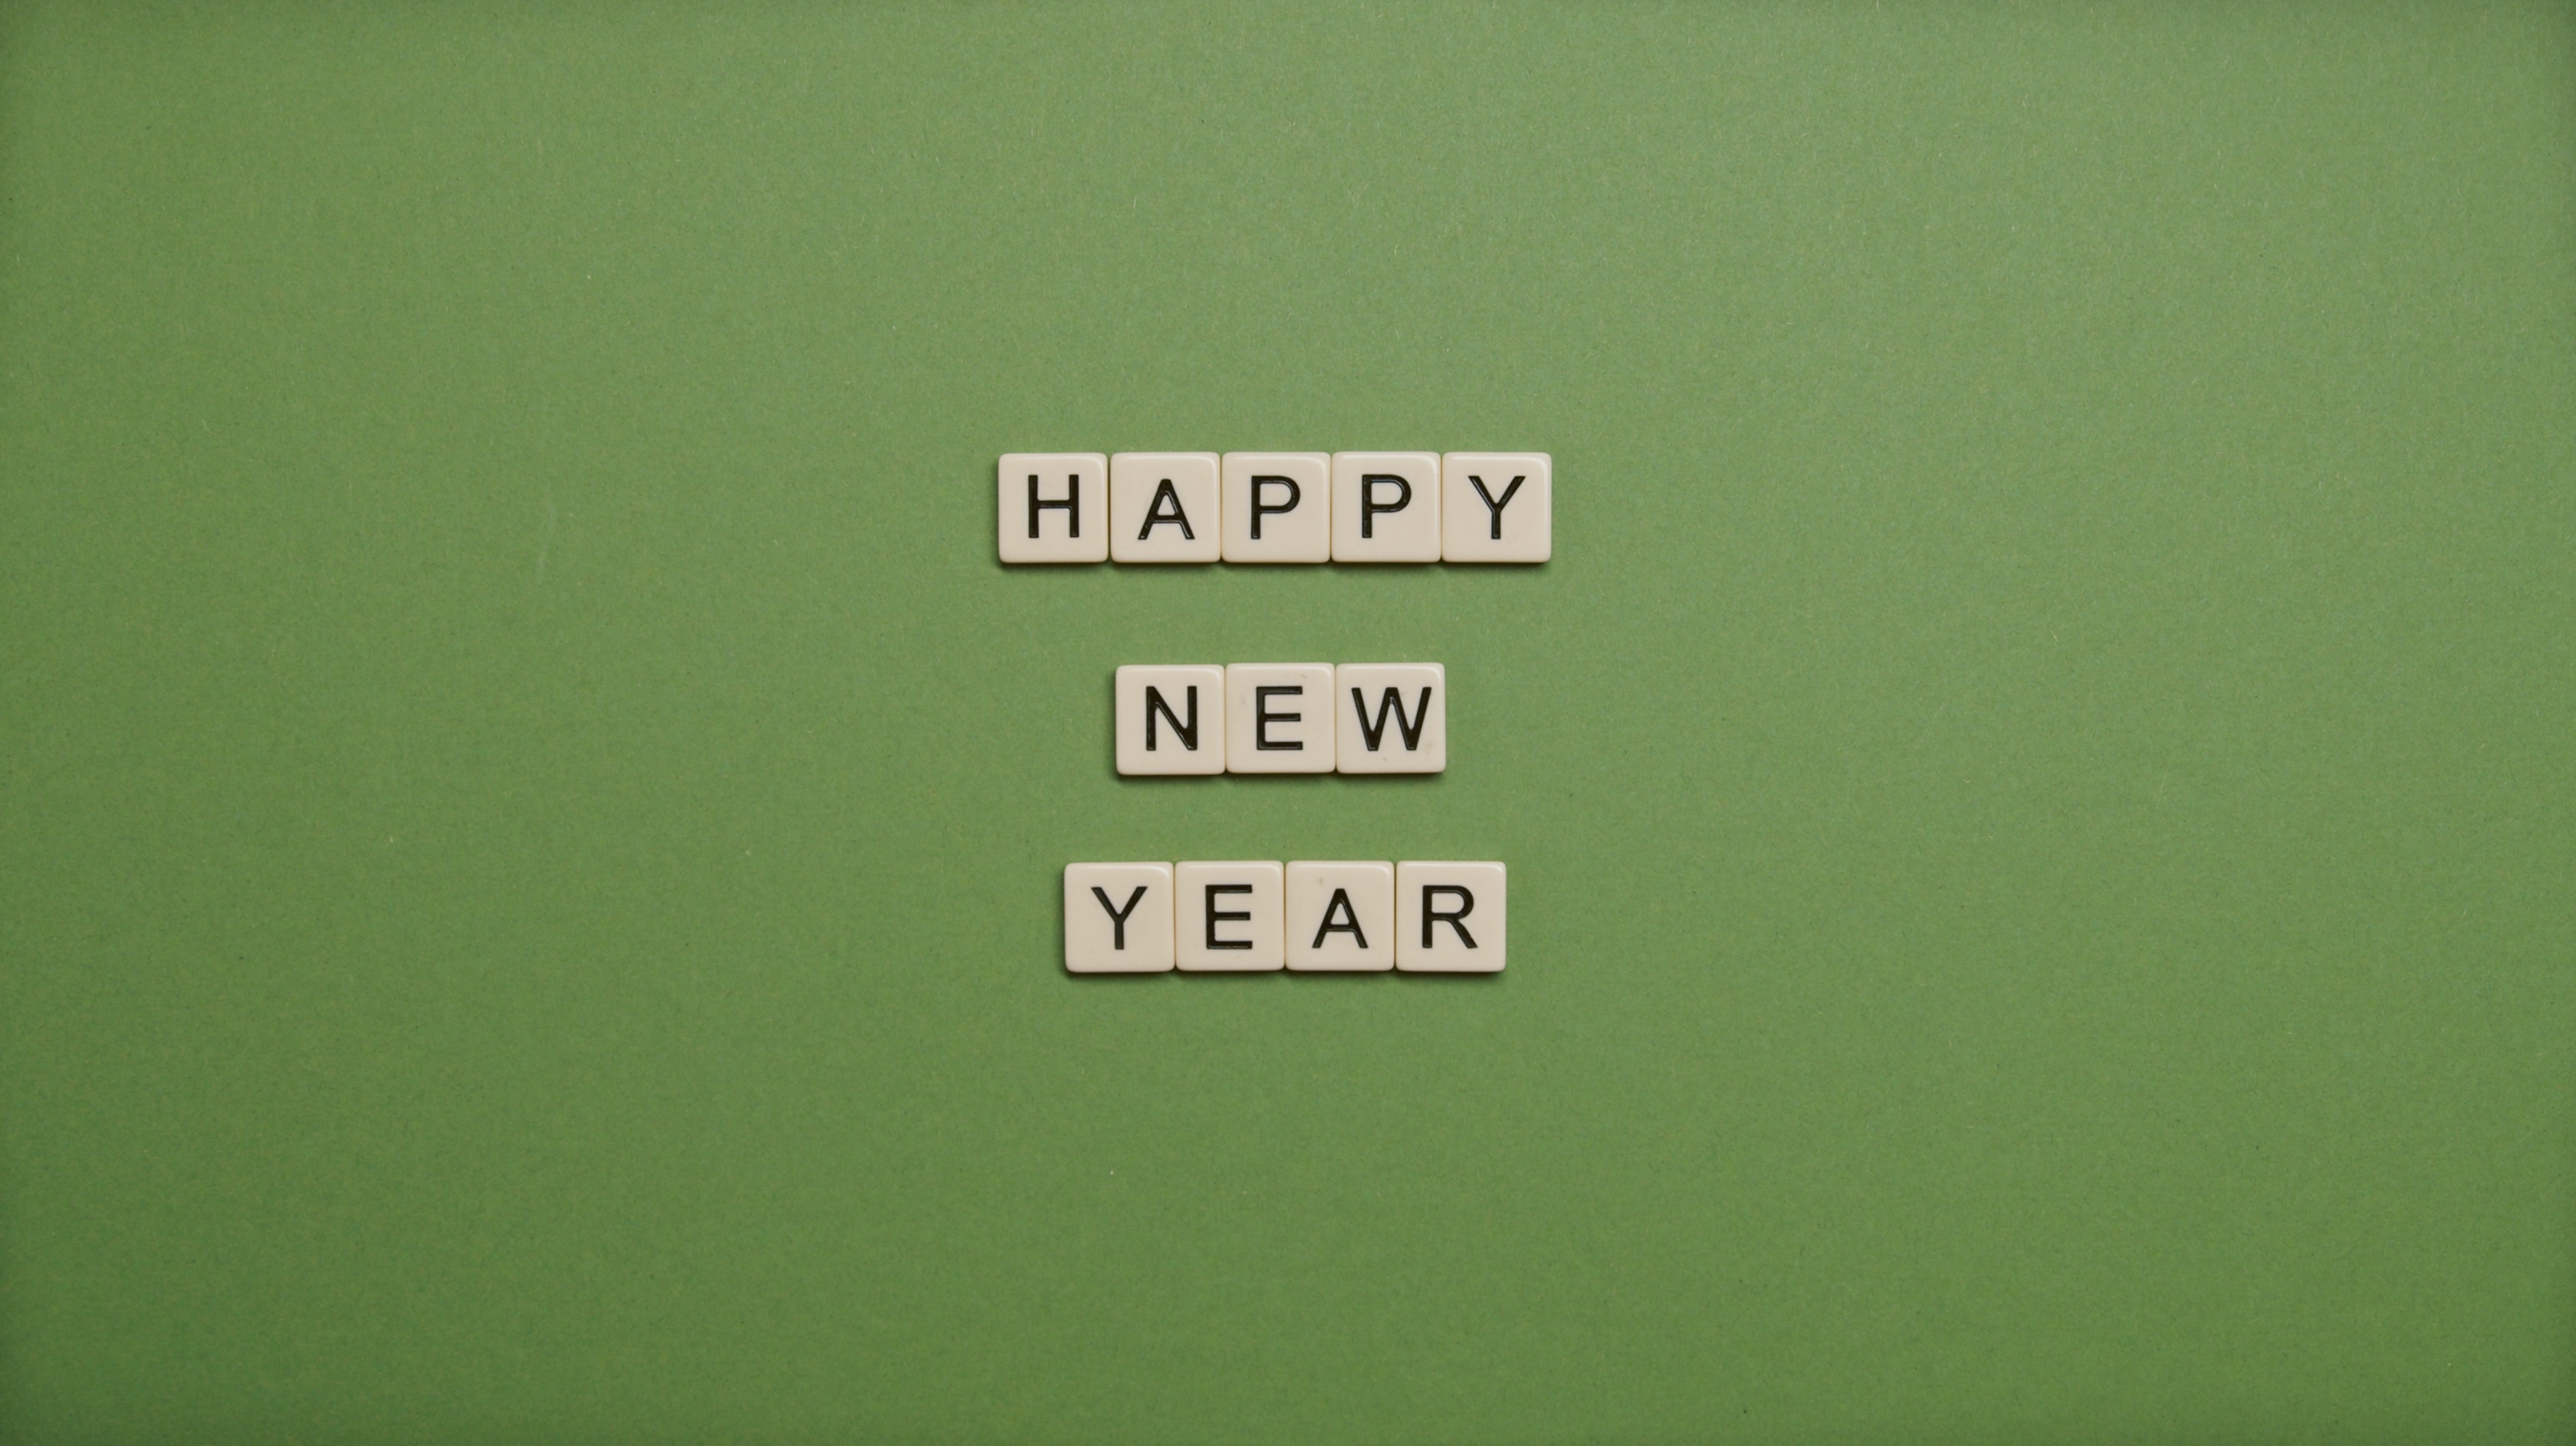 Some scrabble letters spelling out: Happy New Year